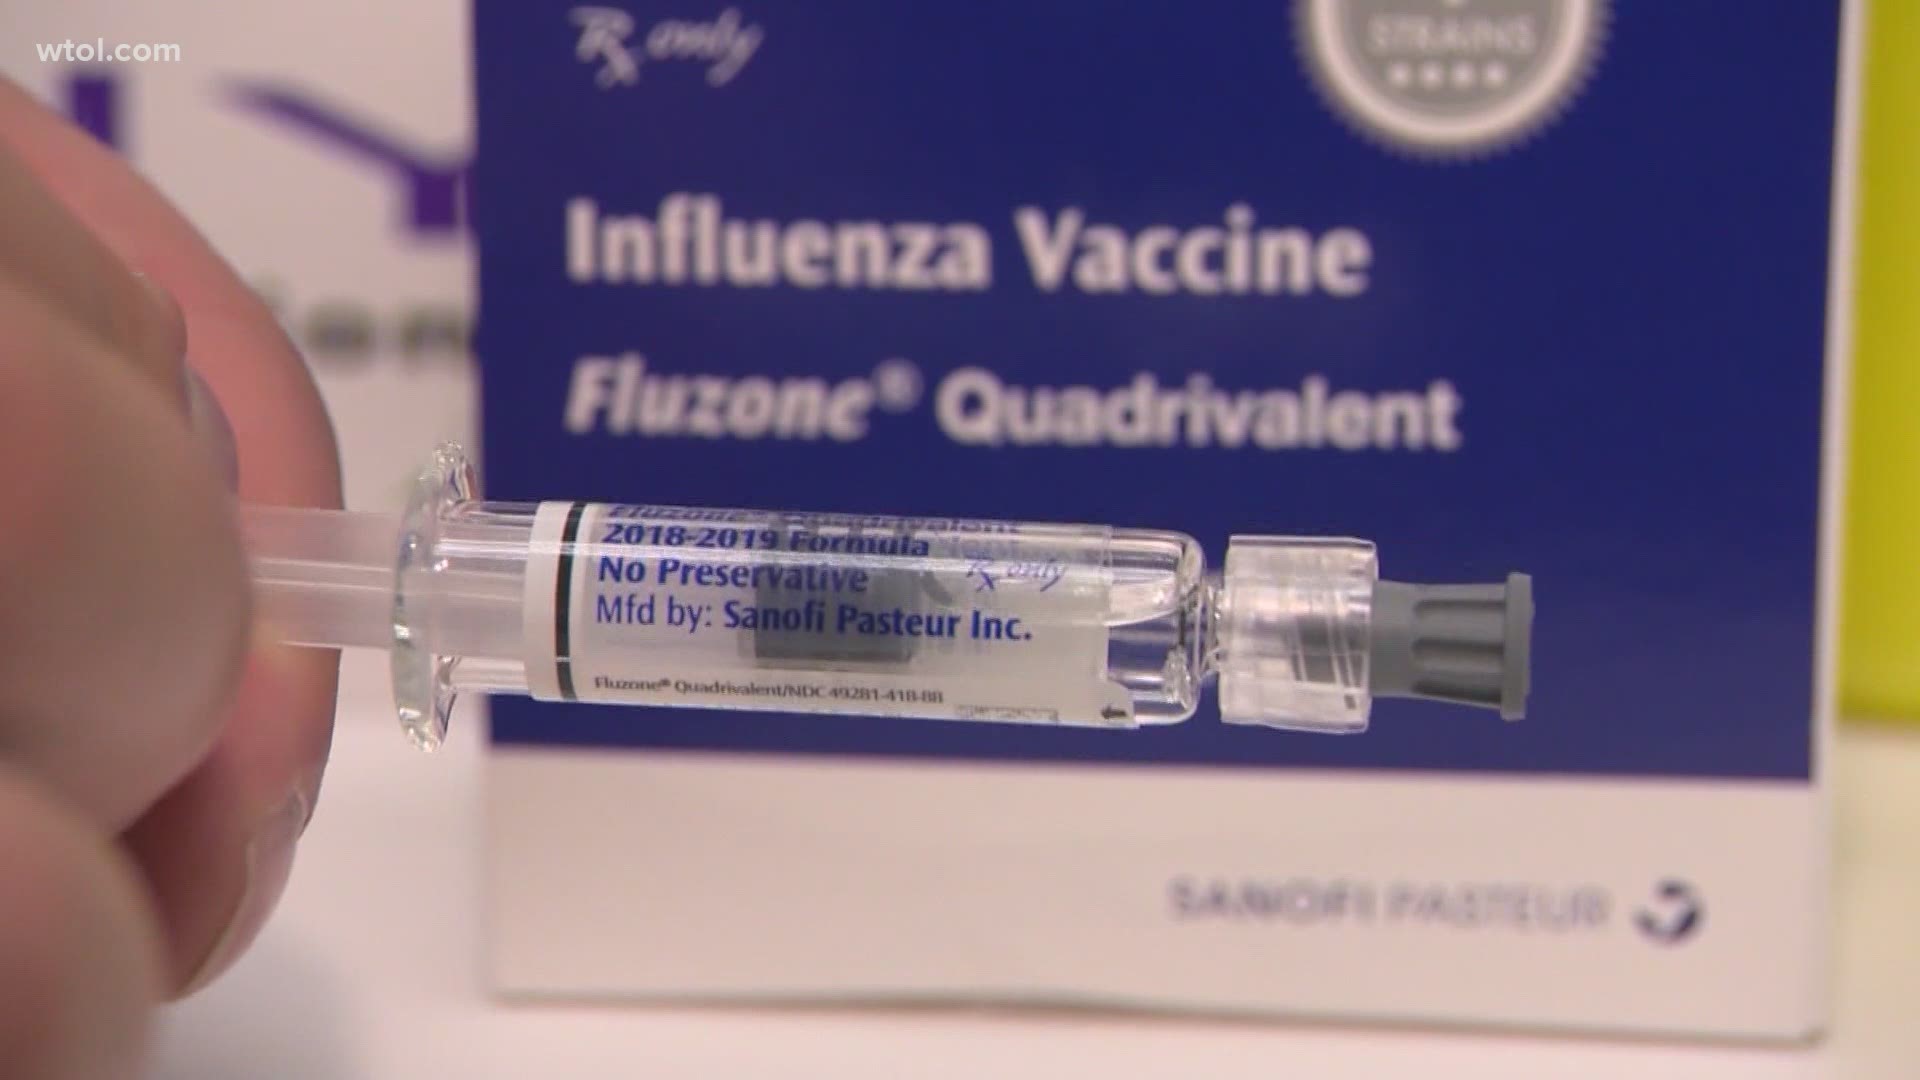 So far this season there have only been 2 flu-related hospitalizations in Lucas Co. Most other NW Ohio counties have had none, according to the Ohio Dept. of Health.